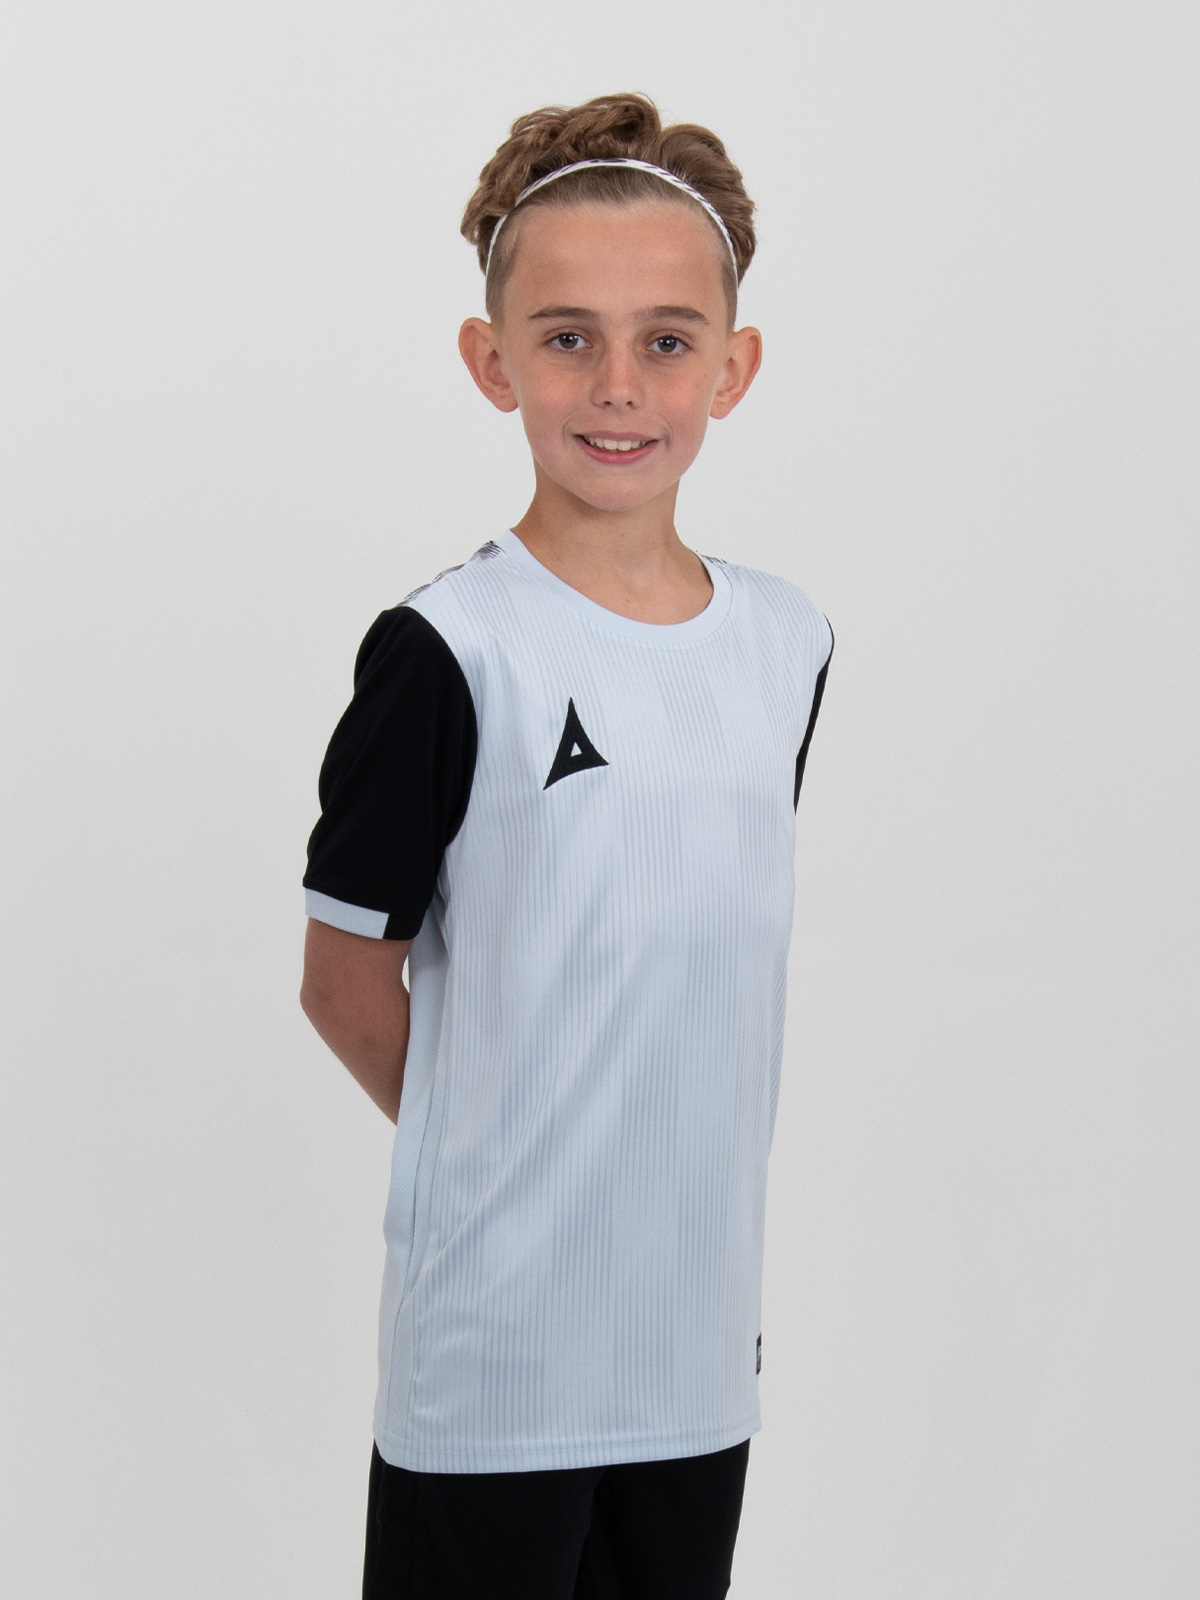 a child is wearing a grey football shirt in a junior size.